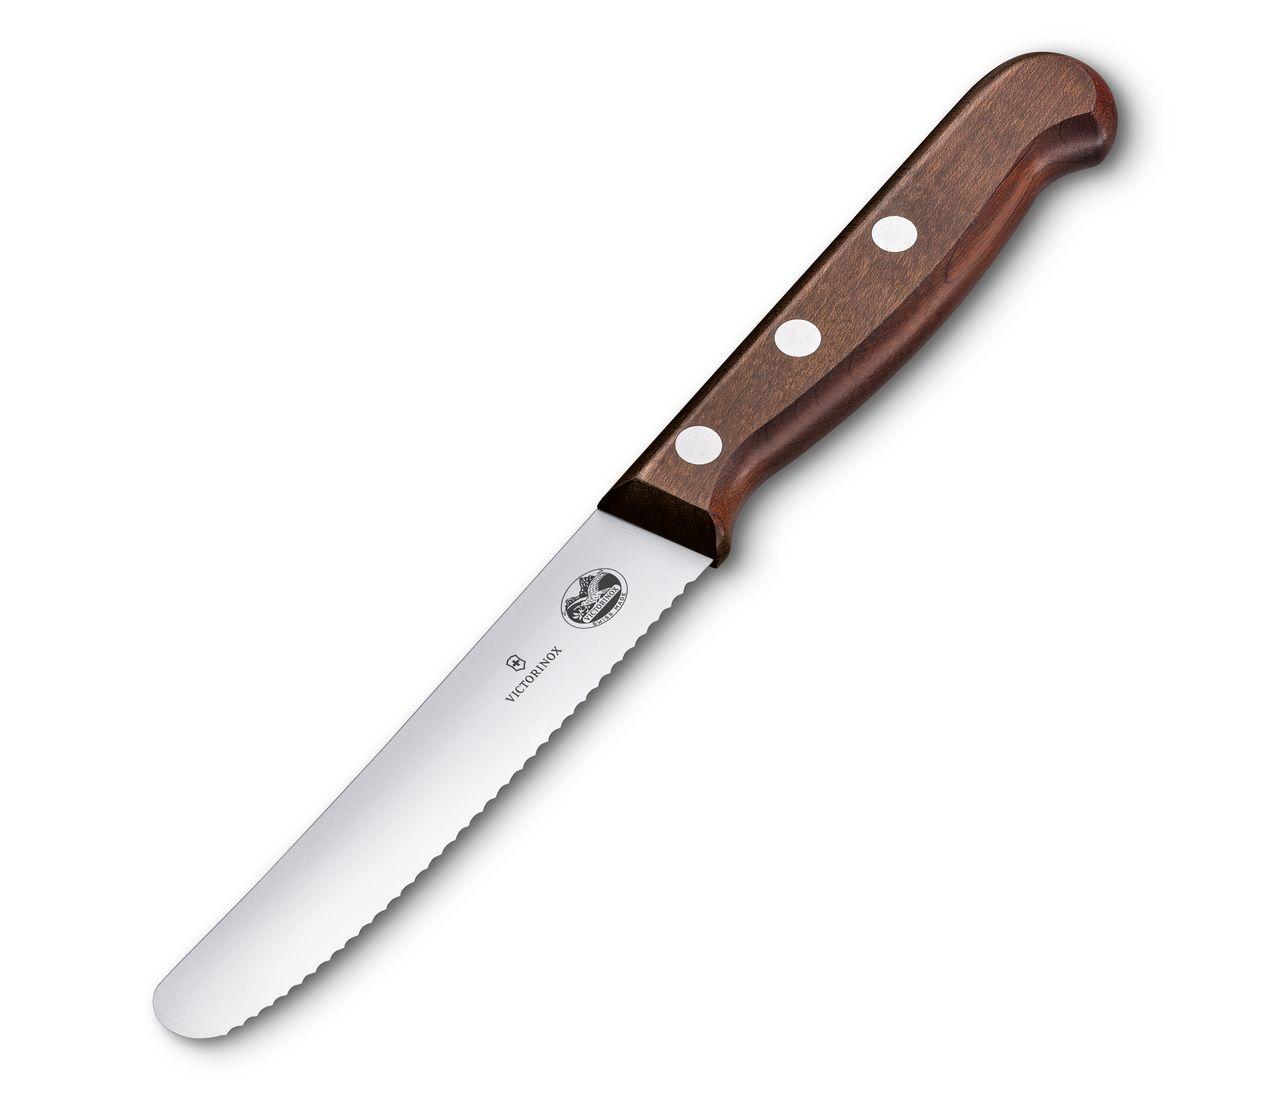 Wood Tomato and Table Knife-5.0830.11G